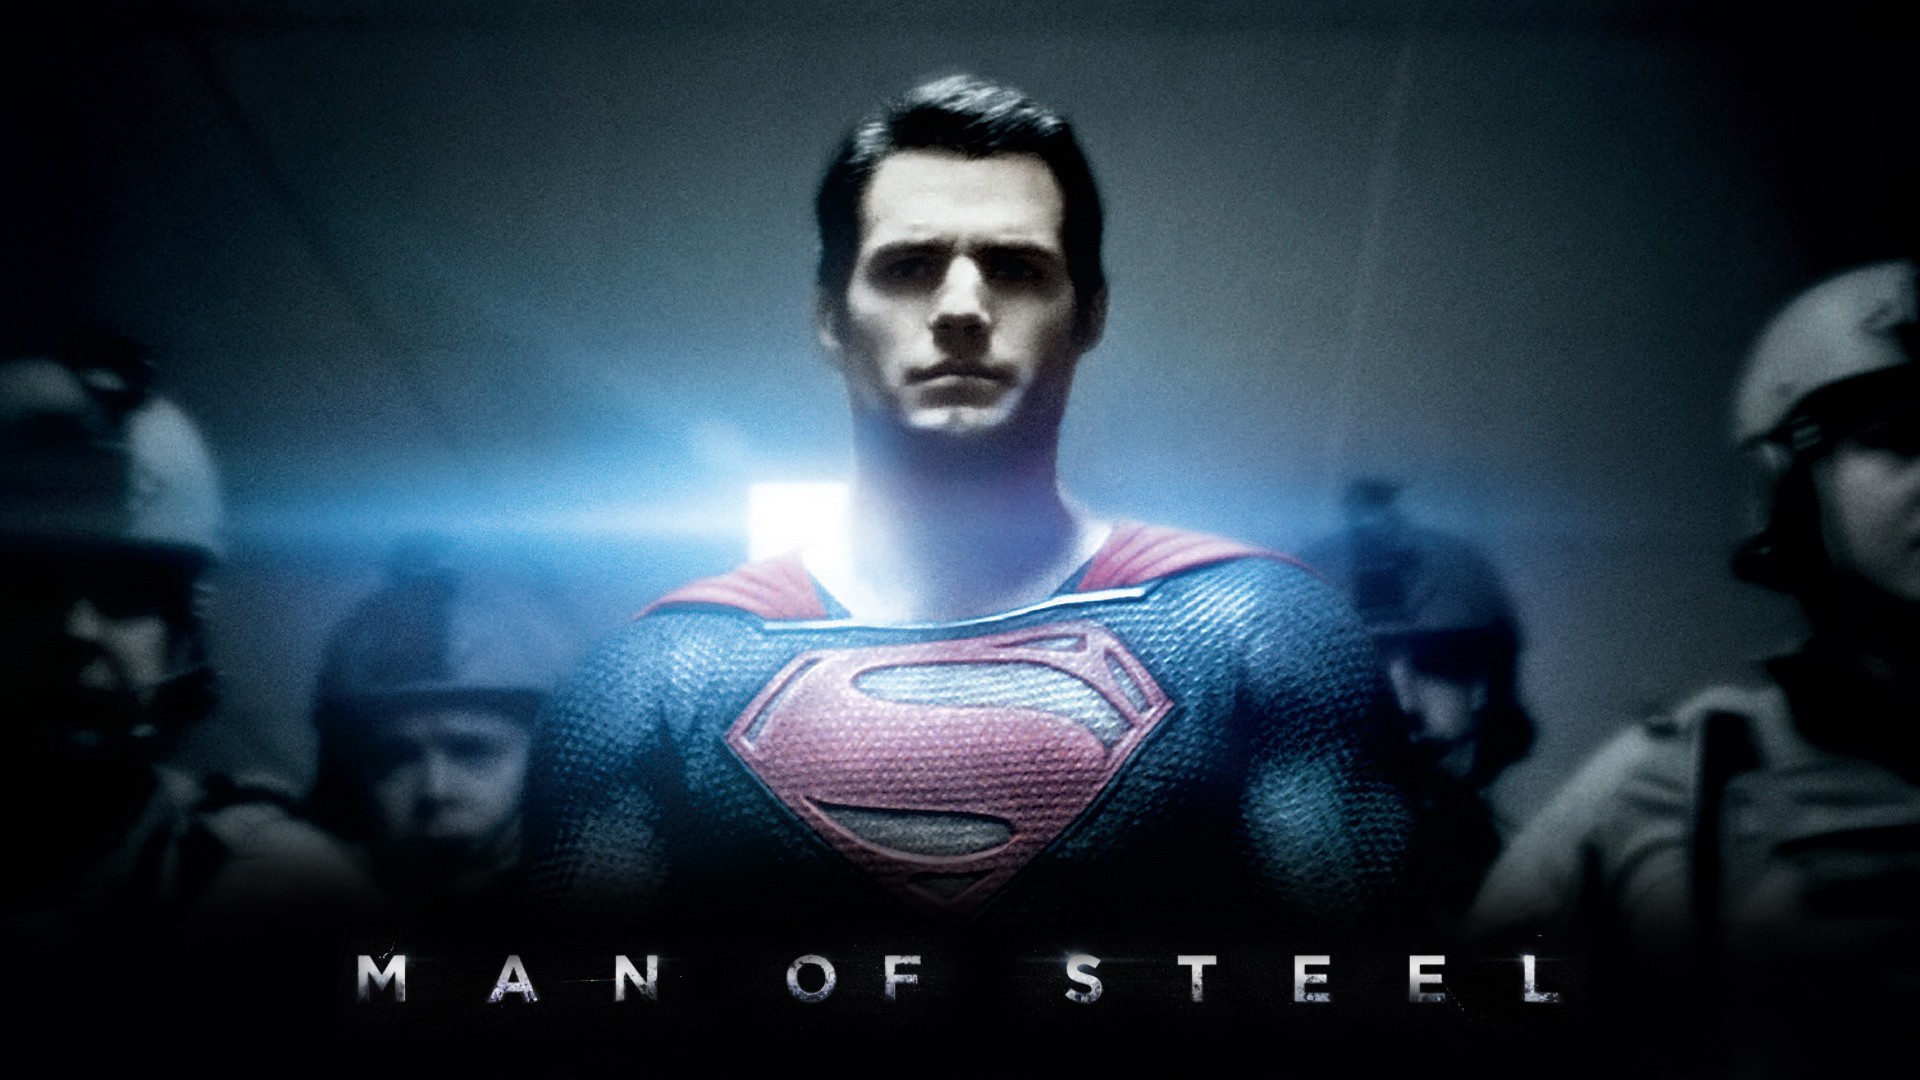 Henry Cavill Man of Steel 2013 Exclusive HD Wallpapers 3879